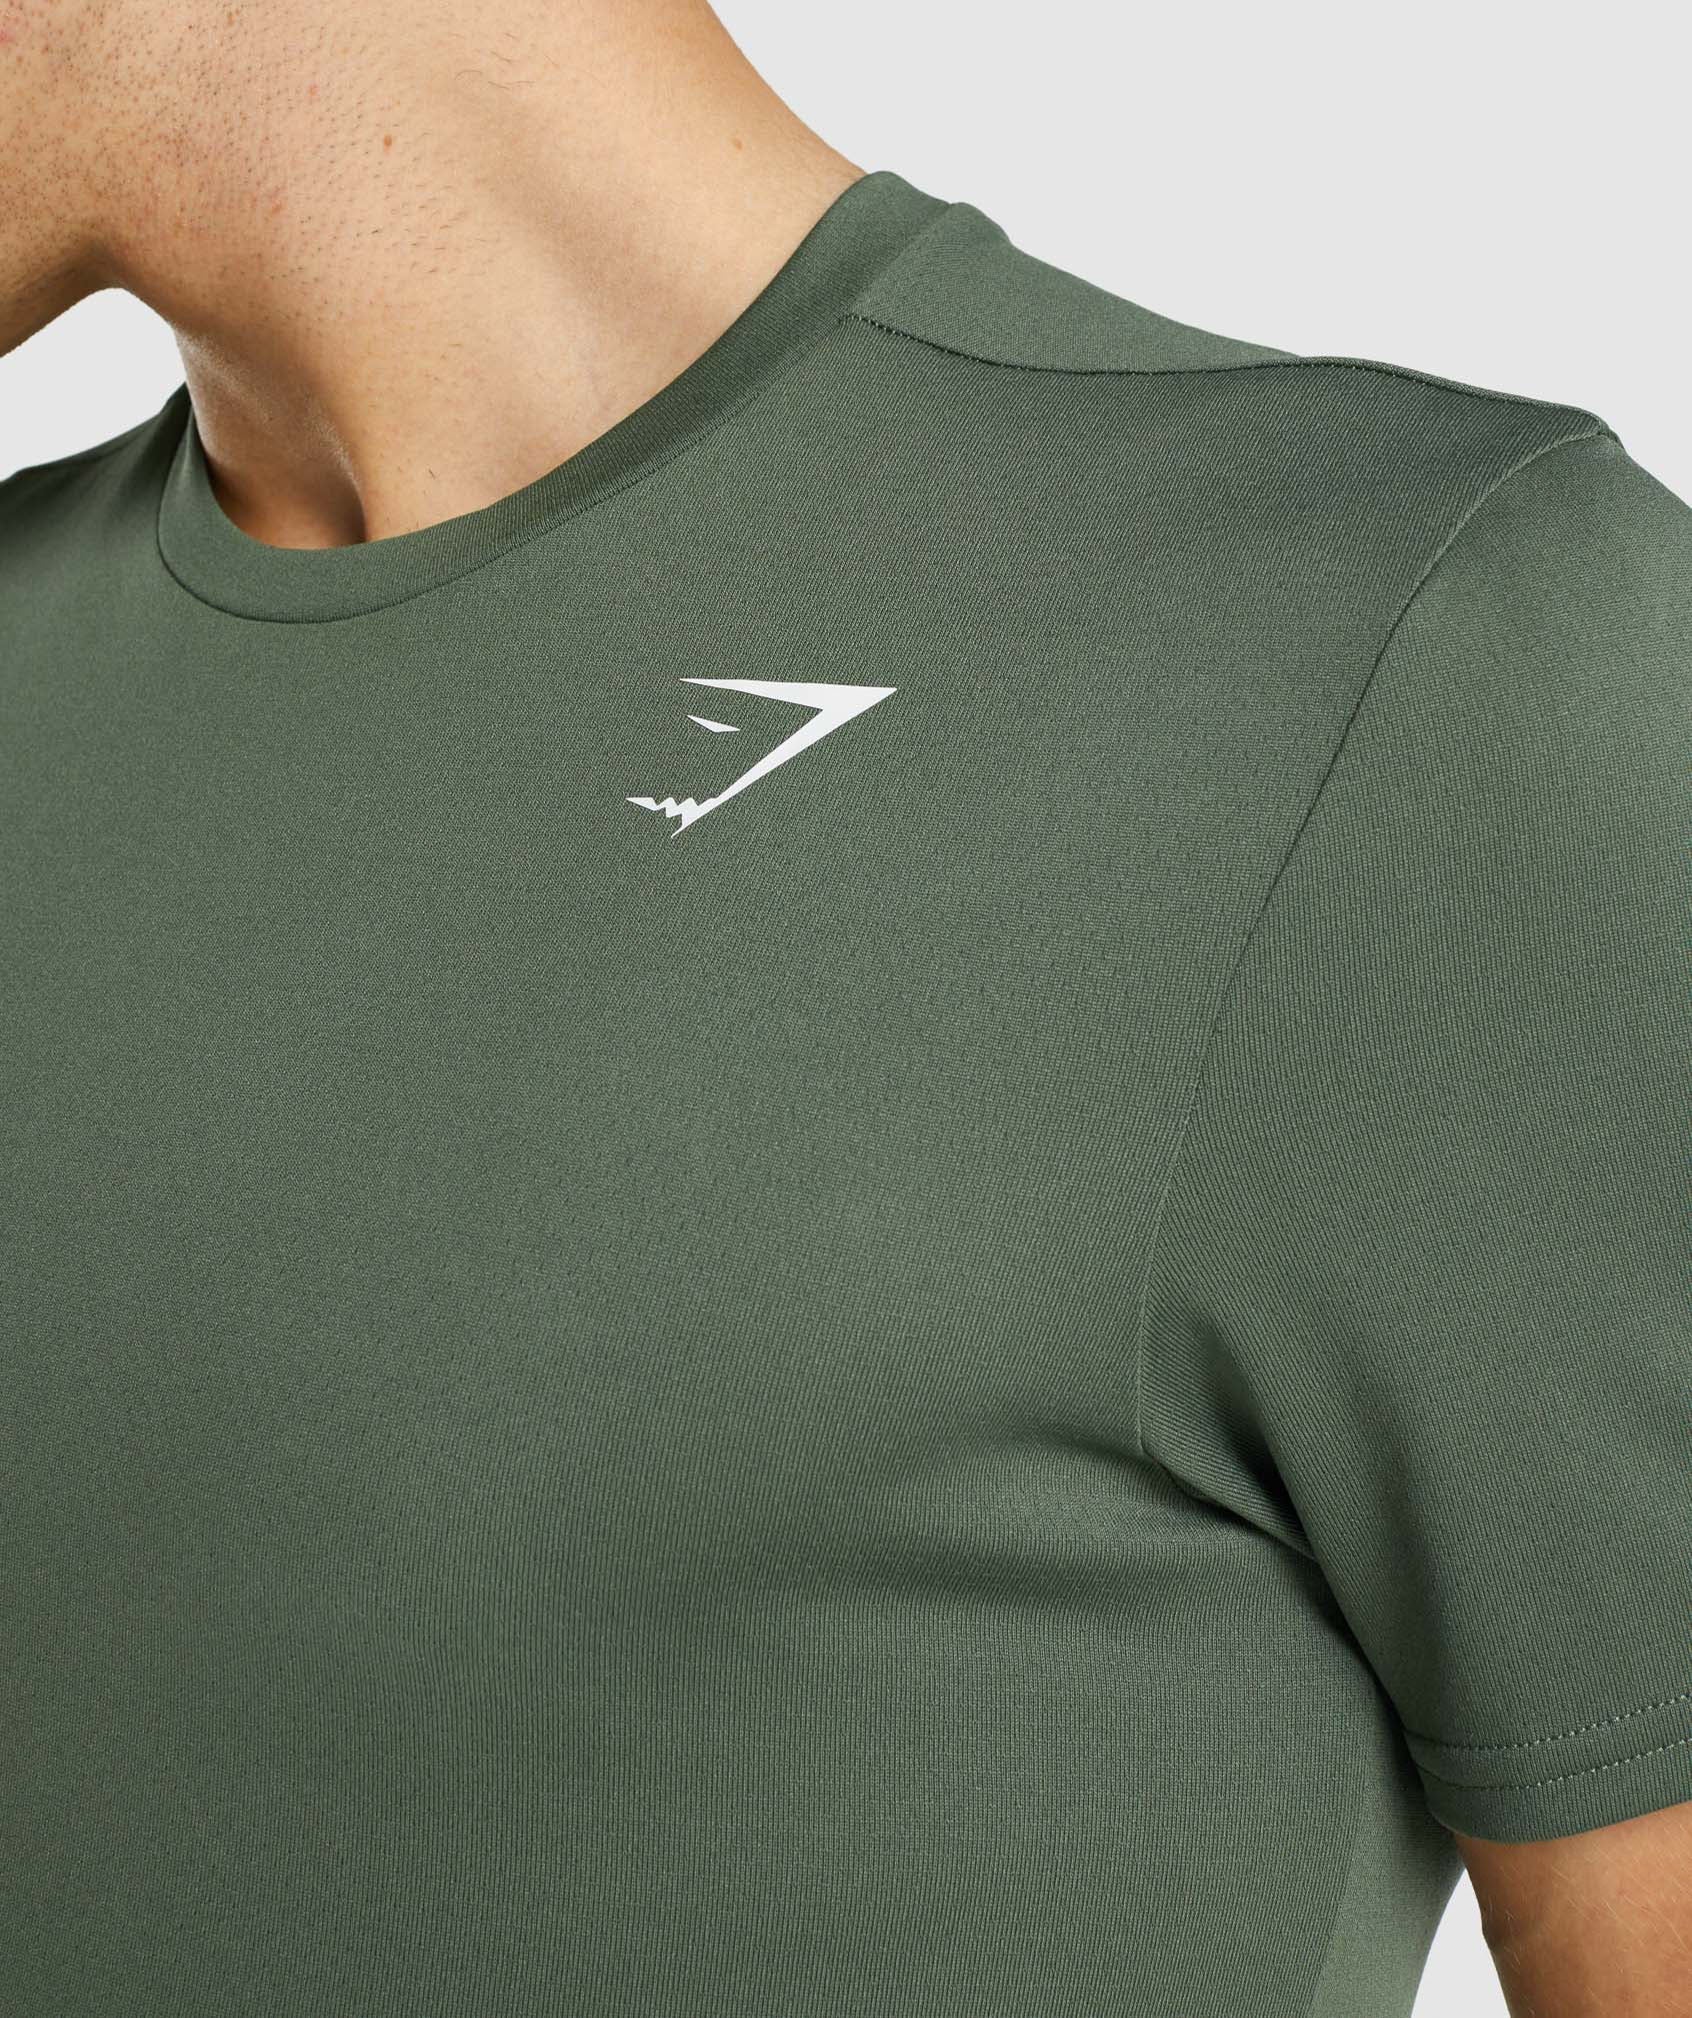 Arrival T-Shirt in Green - view 6